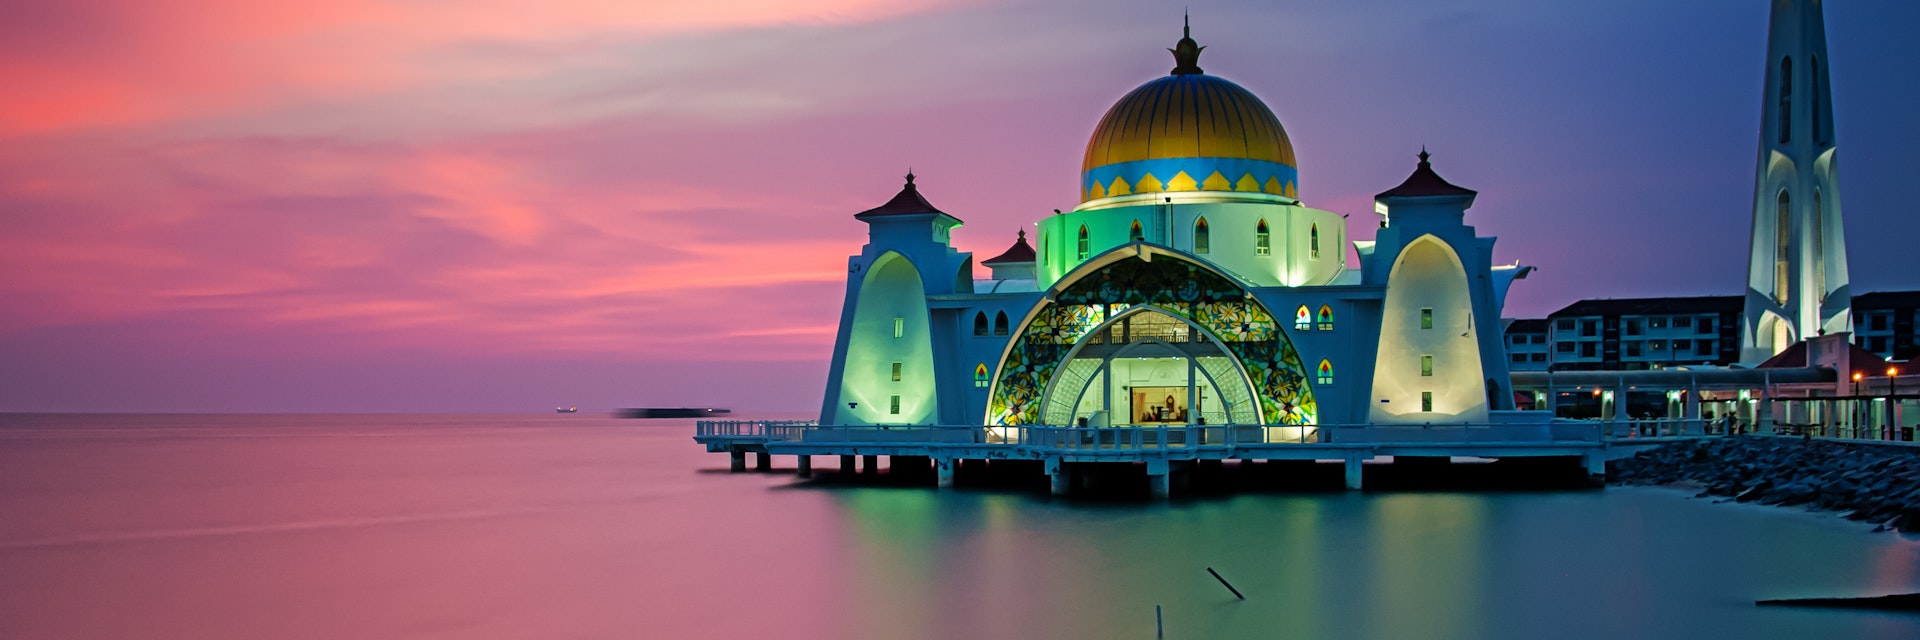 Strait mosque during sunset; Shutterstock ID 184811996; Your name (First / Last): Lauren Gillmroe; GL account no.: 56530; Netsuite department name: Online-Design; Full Product or Project name including edition: 65050/ Online Design /LaurenGillmore/POI